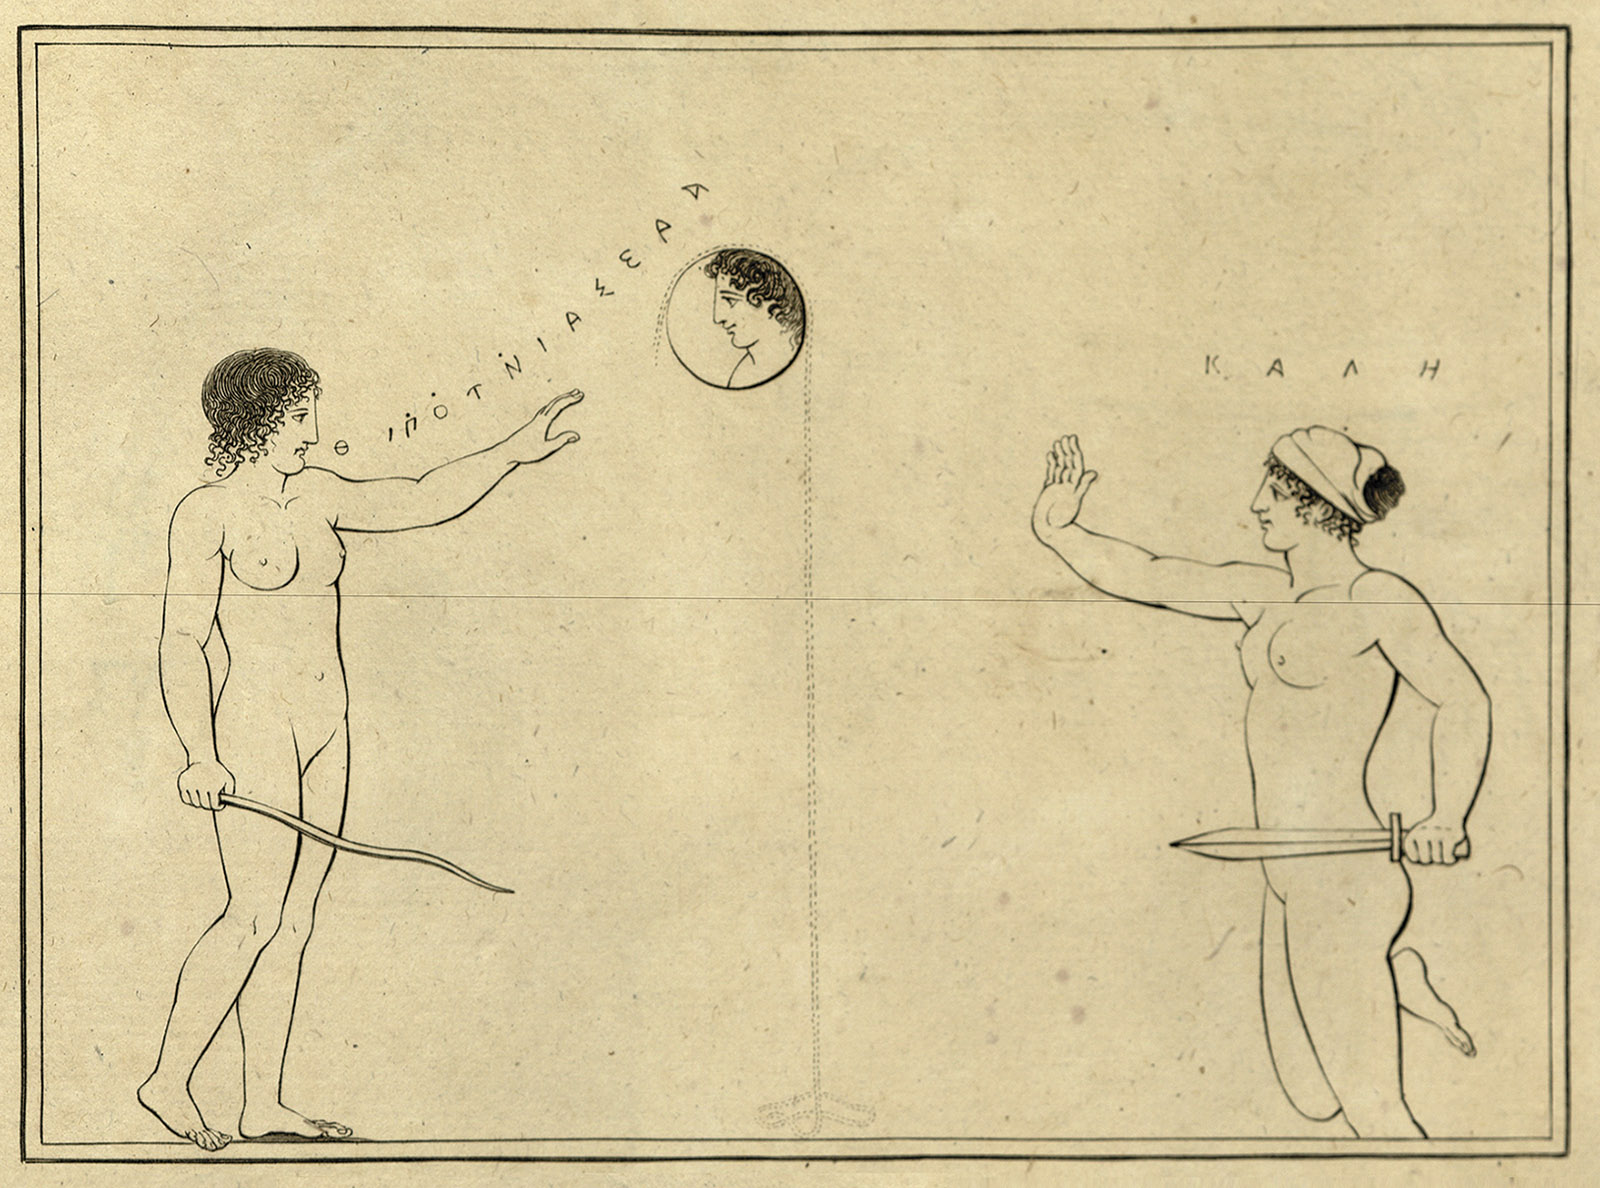 A line drawing of two women drawing down the moon